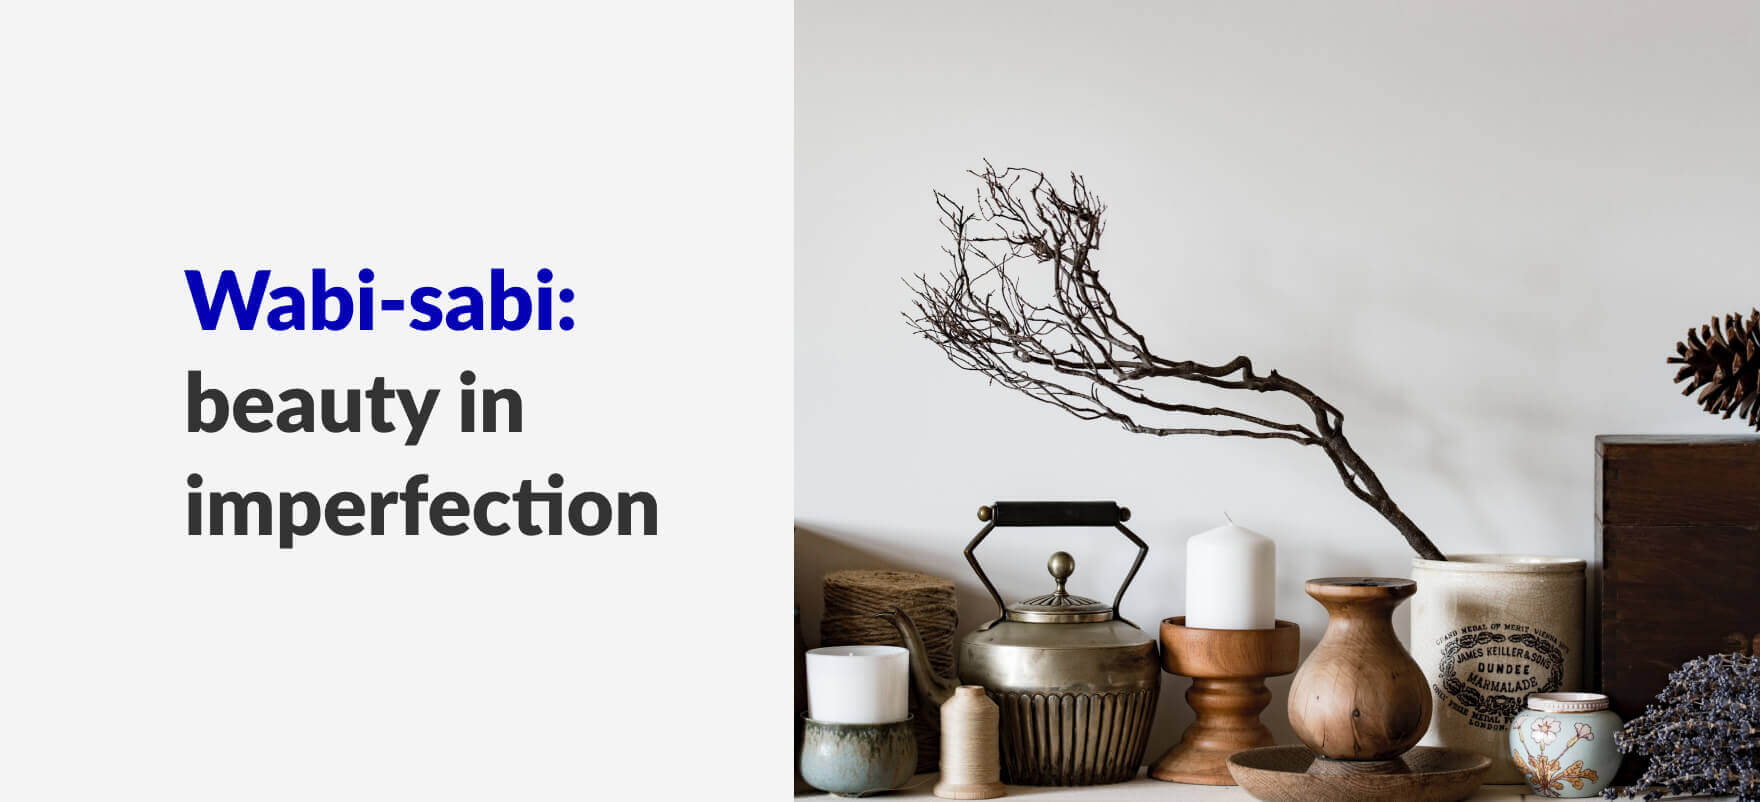 wabi-sabi: beauty in imperfection article banner